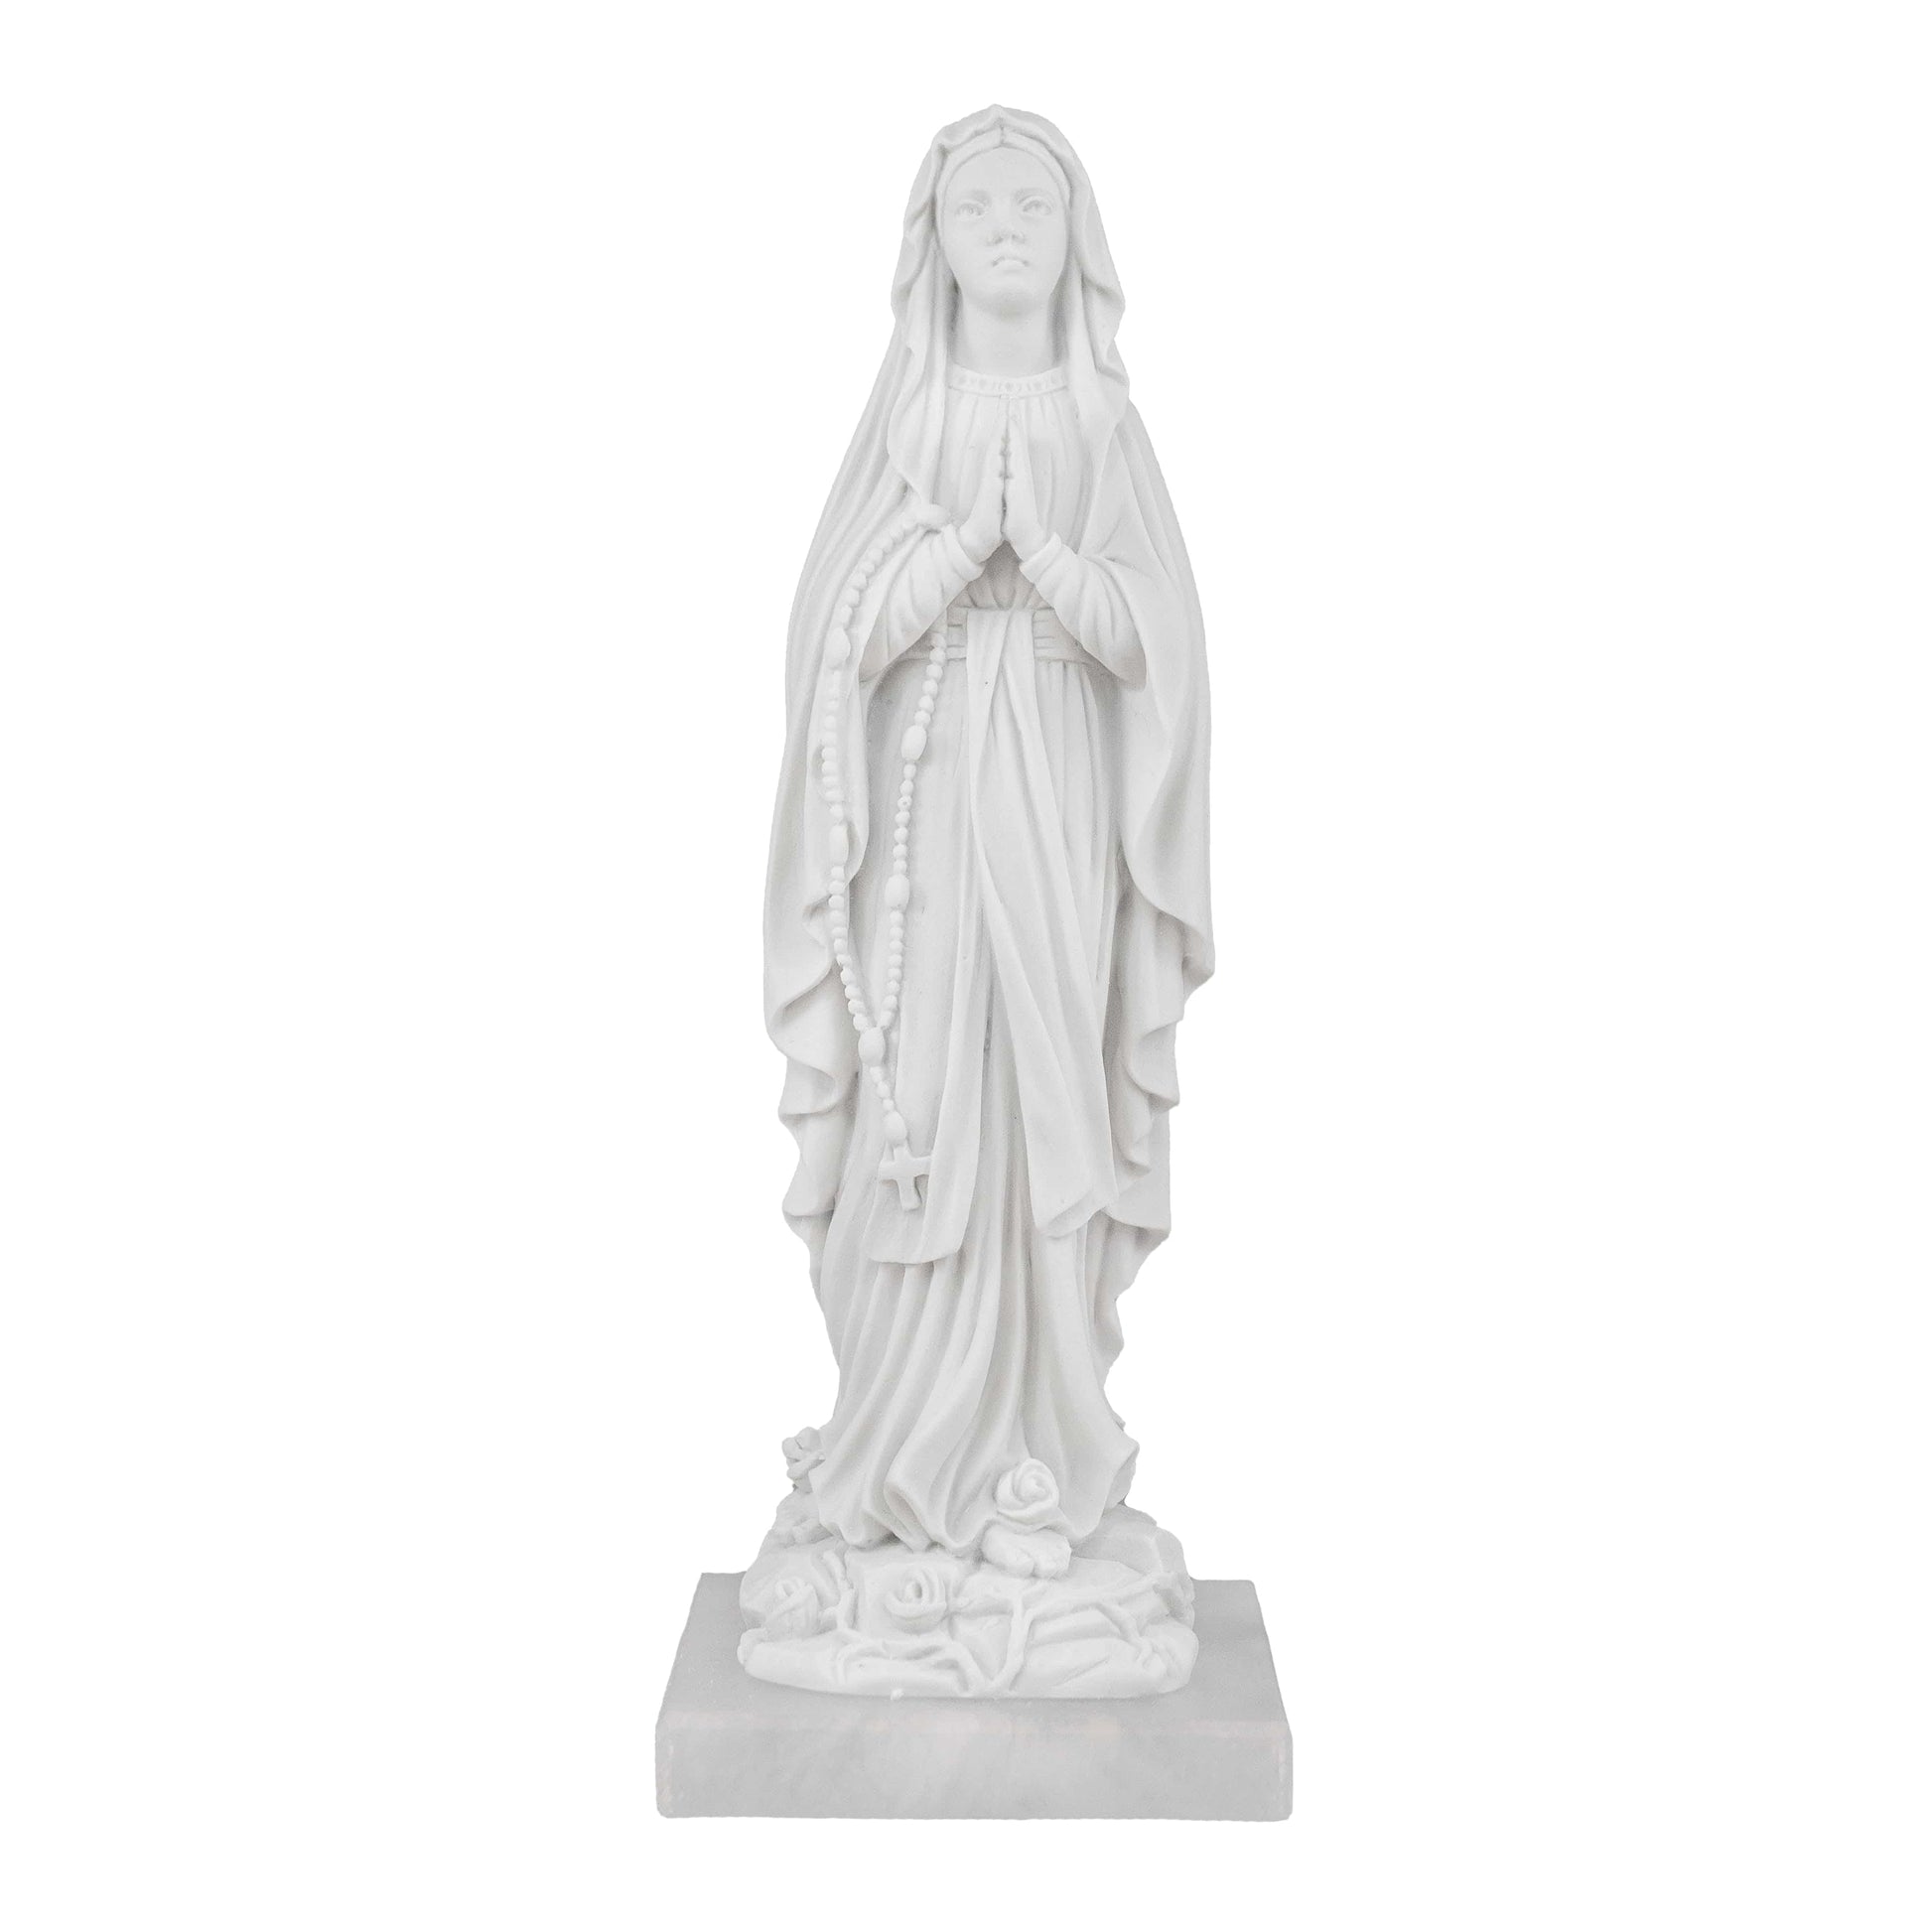 MONDO CATTOLICO 18 cm Our Lady of Lourdes with Roses White Marble Dust